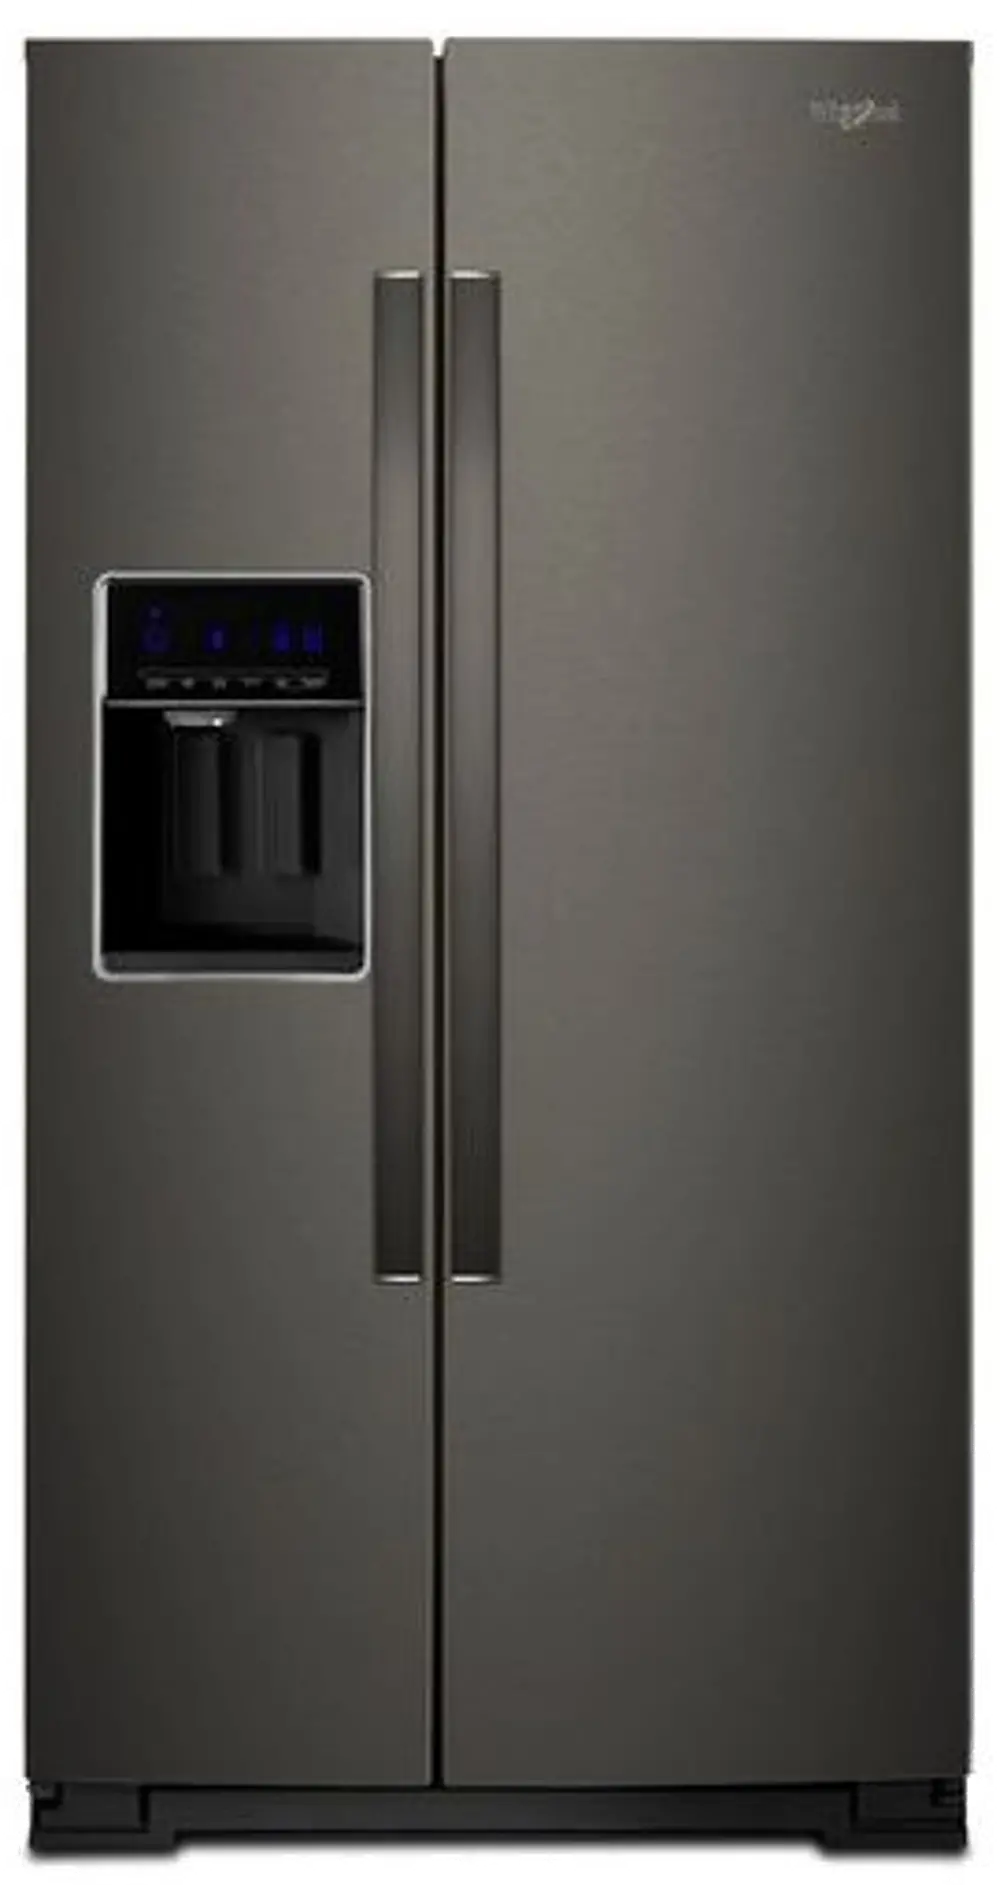 WRS588FIHV Whirlpool 28.5 cu ft Side by Side Refrigerator - Black Stainless Steel-1